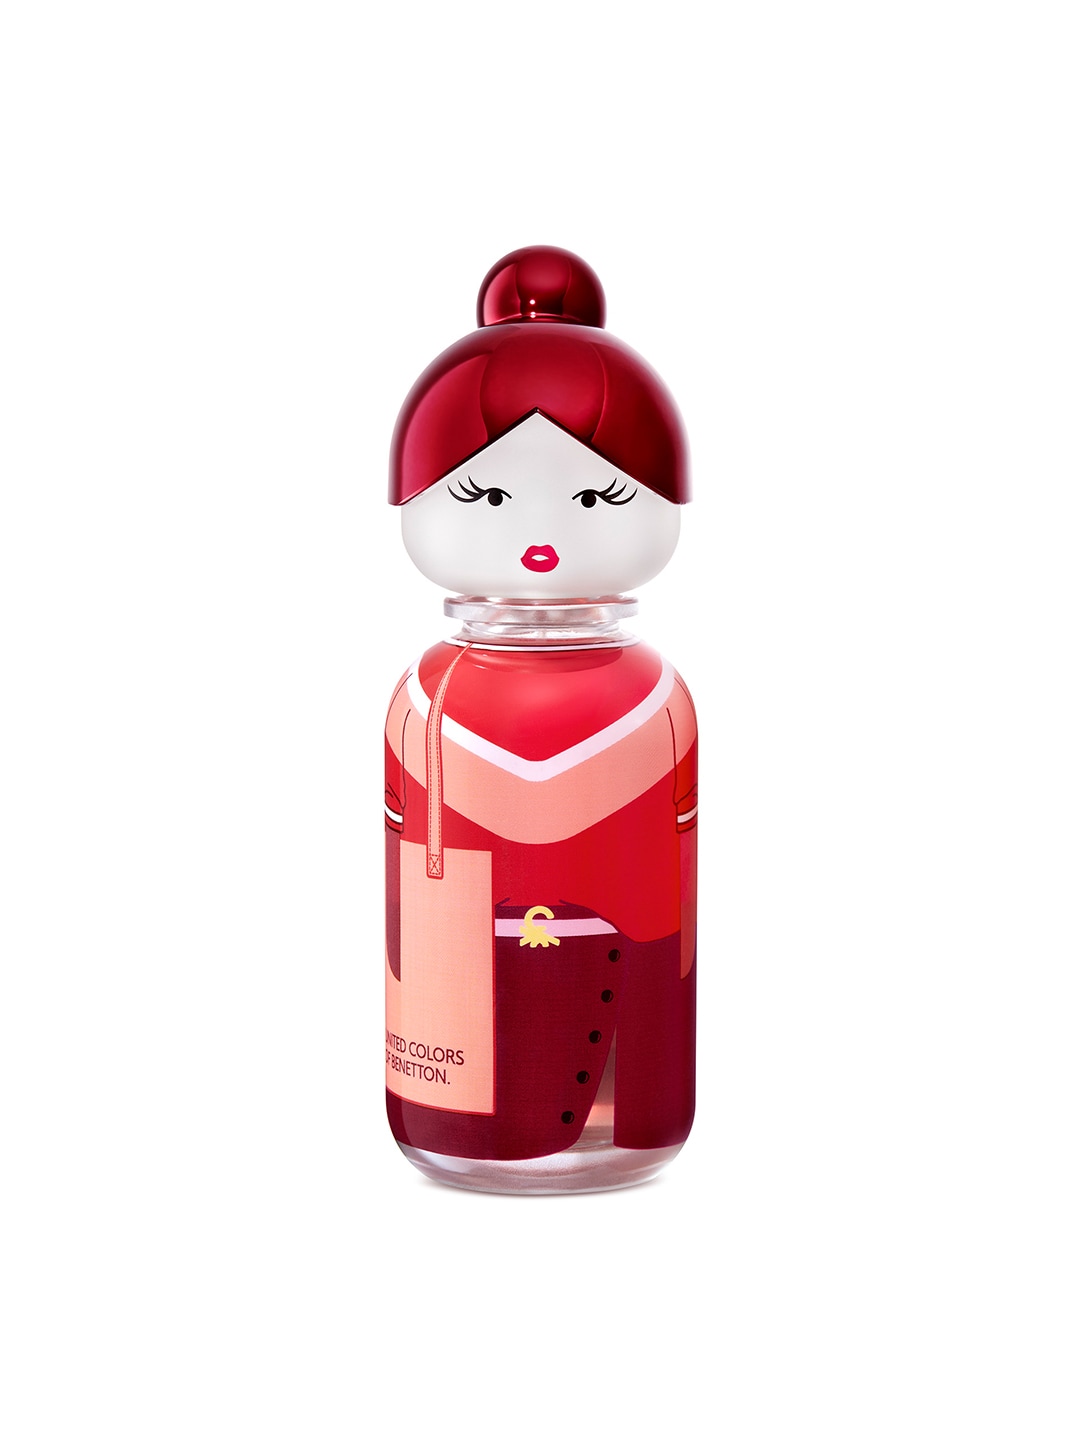 United Colors of Benetton Sisterland Red Rose Eau de Toilette - 80 ml Price in India